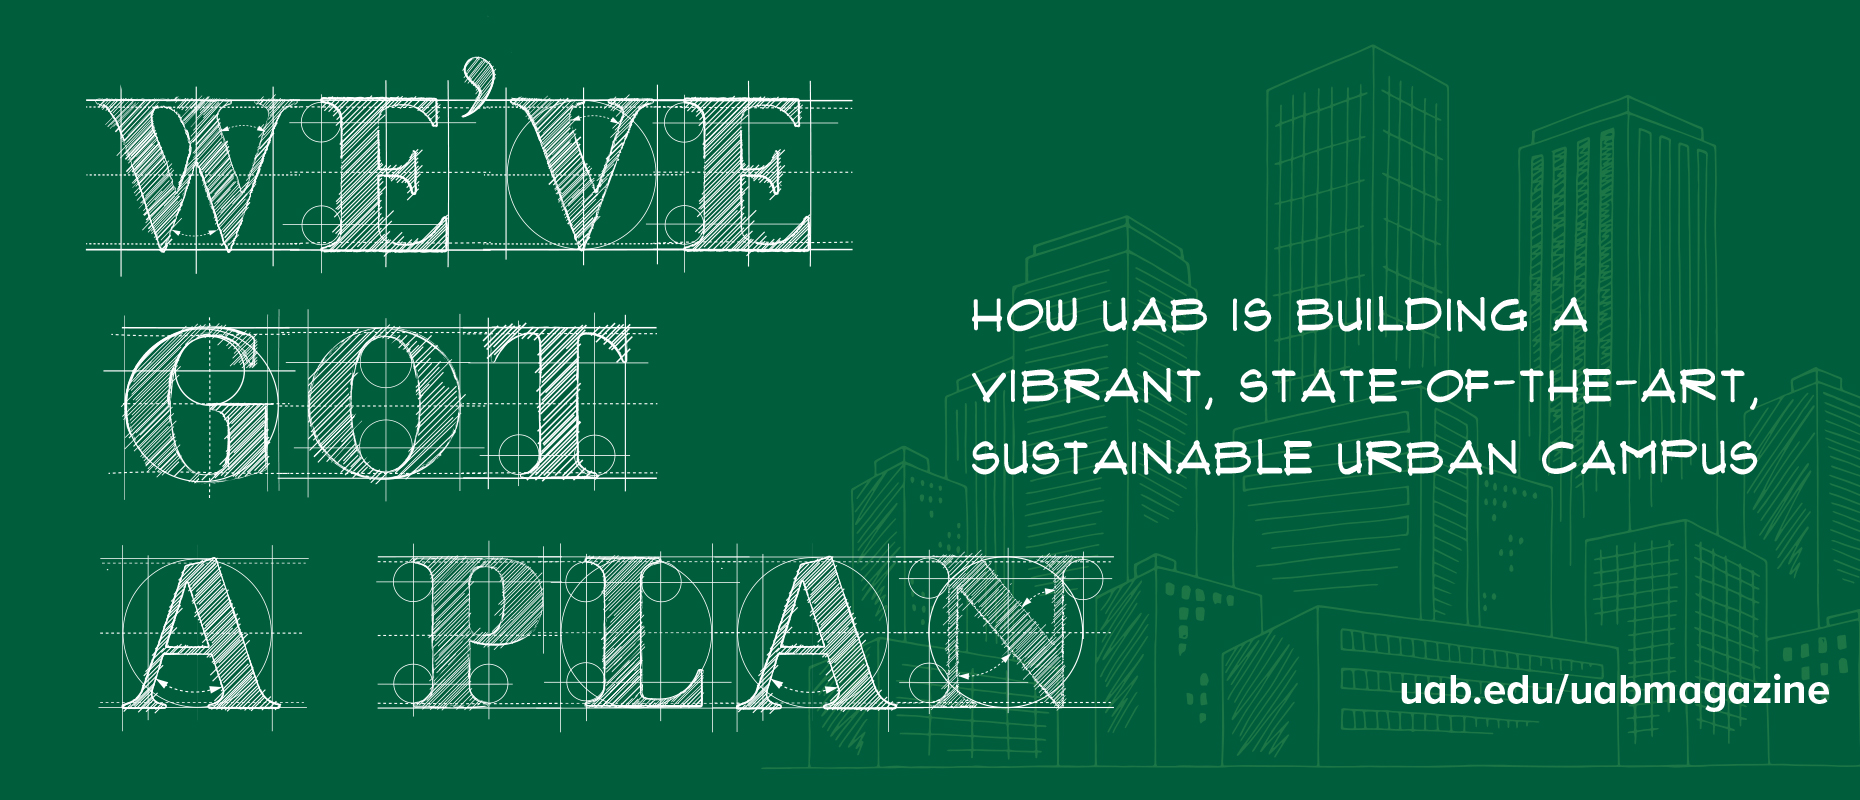 We've got a plan: How UAB is building a vibrant, state-of-the-art, sustainable urban campus